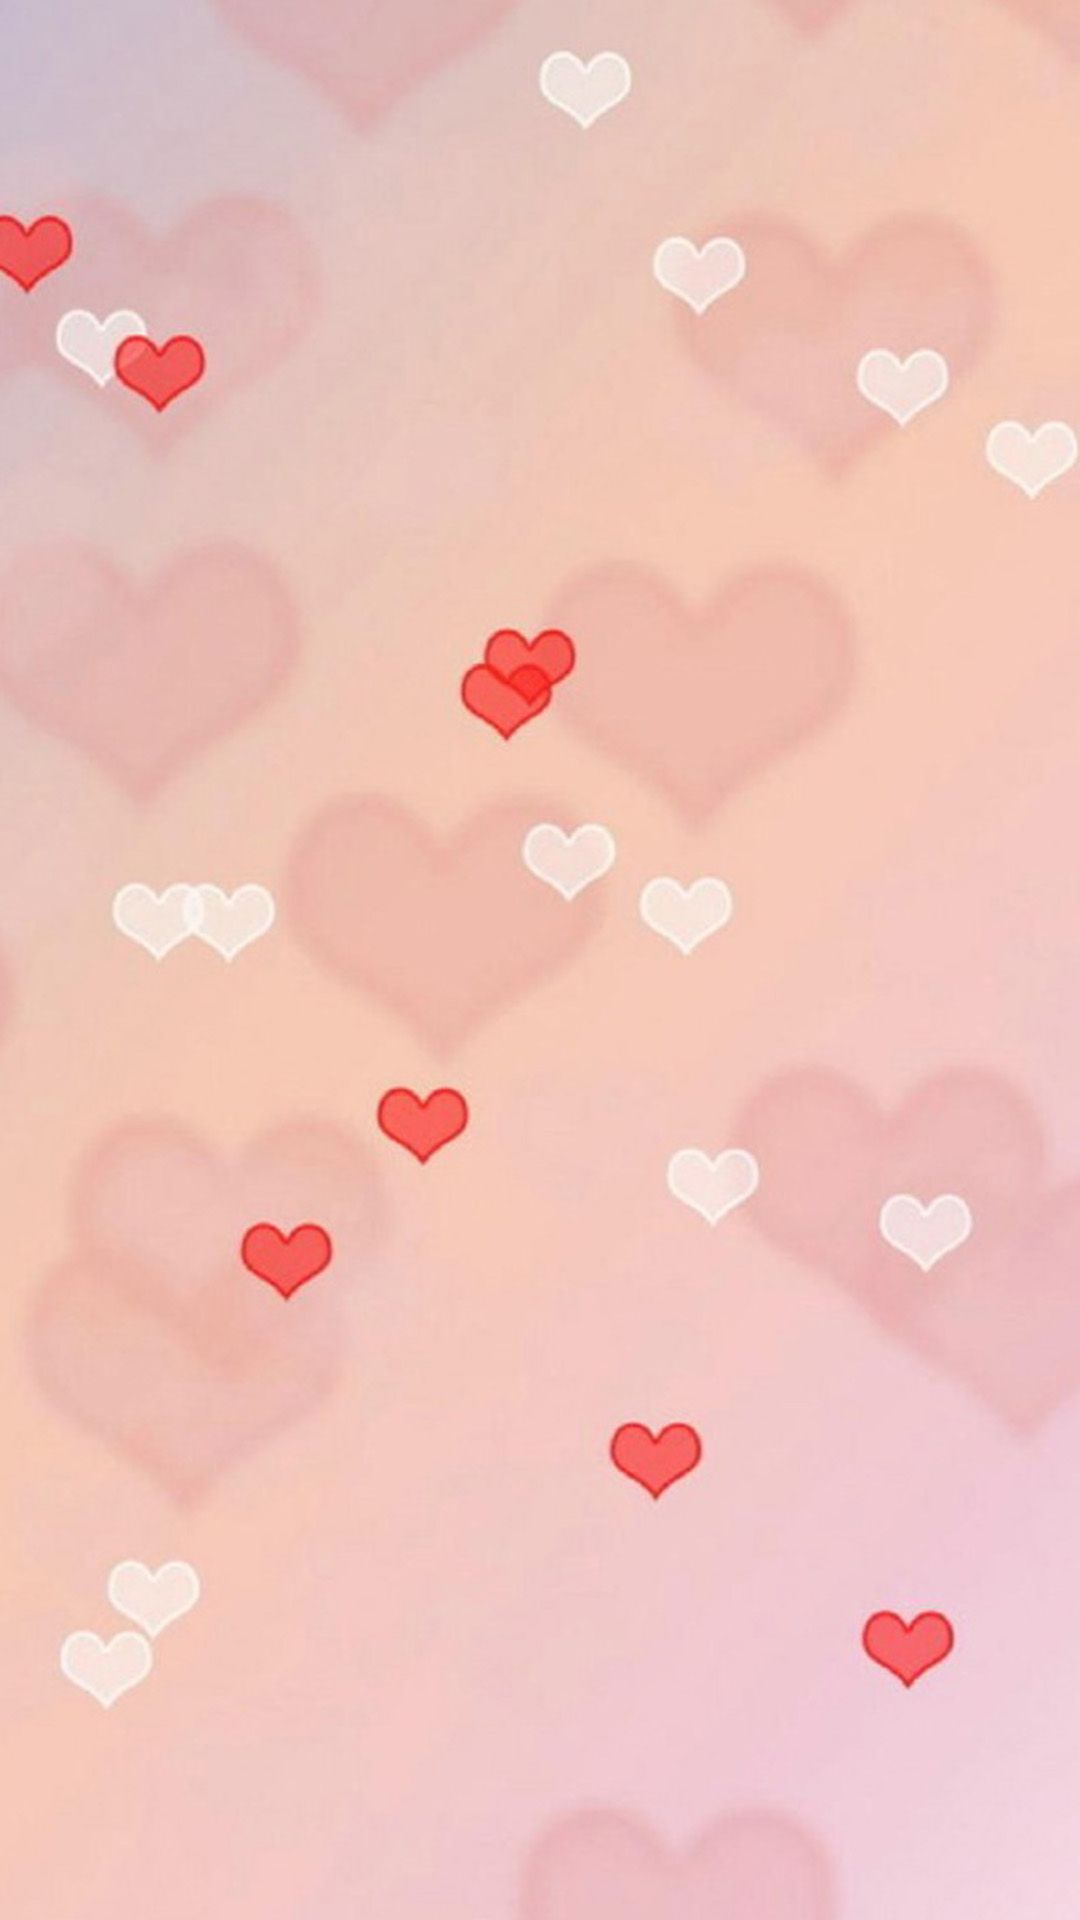 Love Hearts Android Wallpaper - Love Pink Iphone 6 - 1080x1920 Wallpaper -  